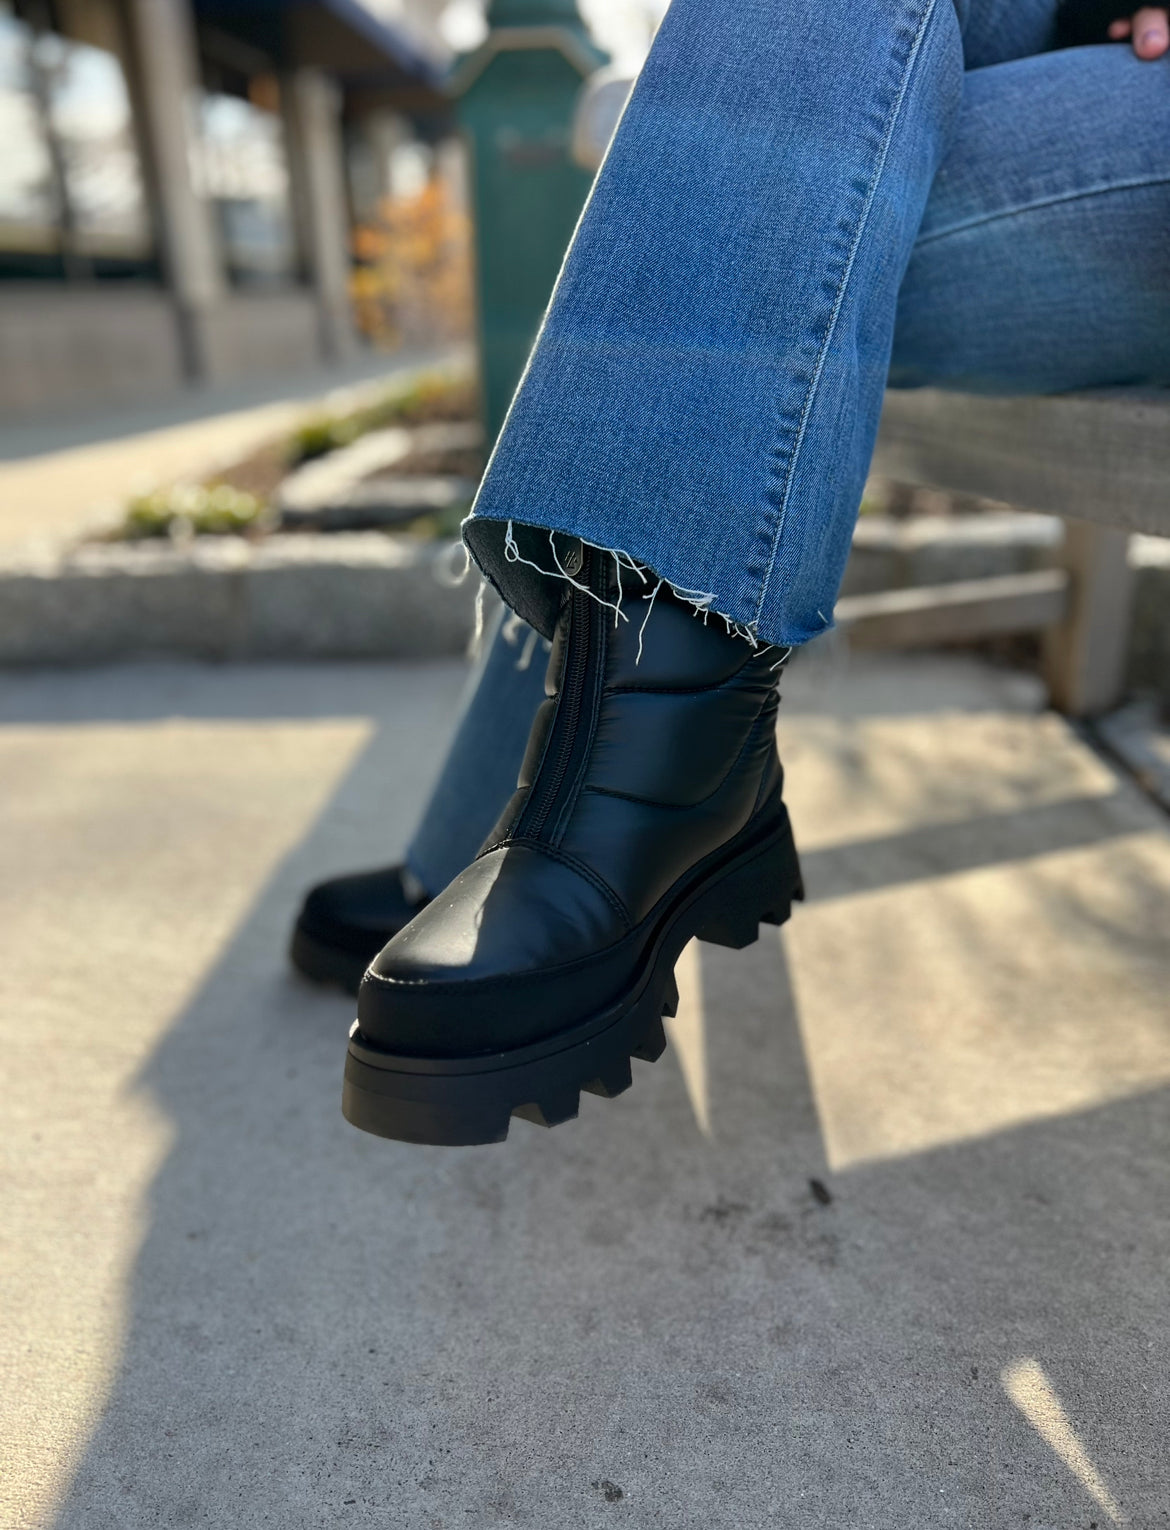 The Center Zip Quilted Nylon Boot in Black